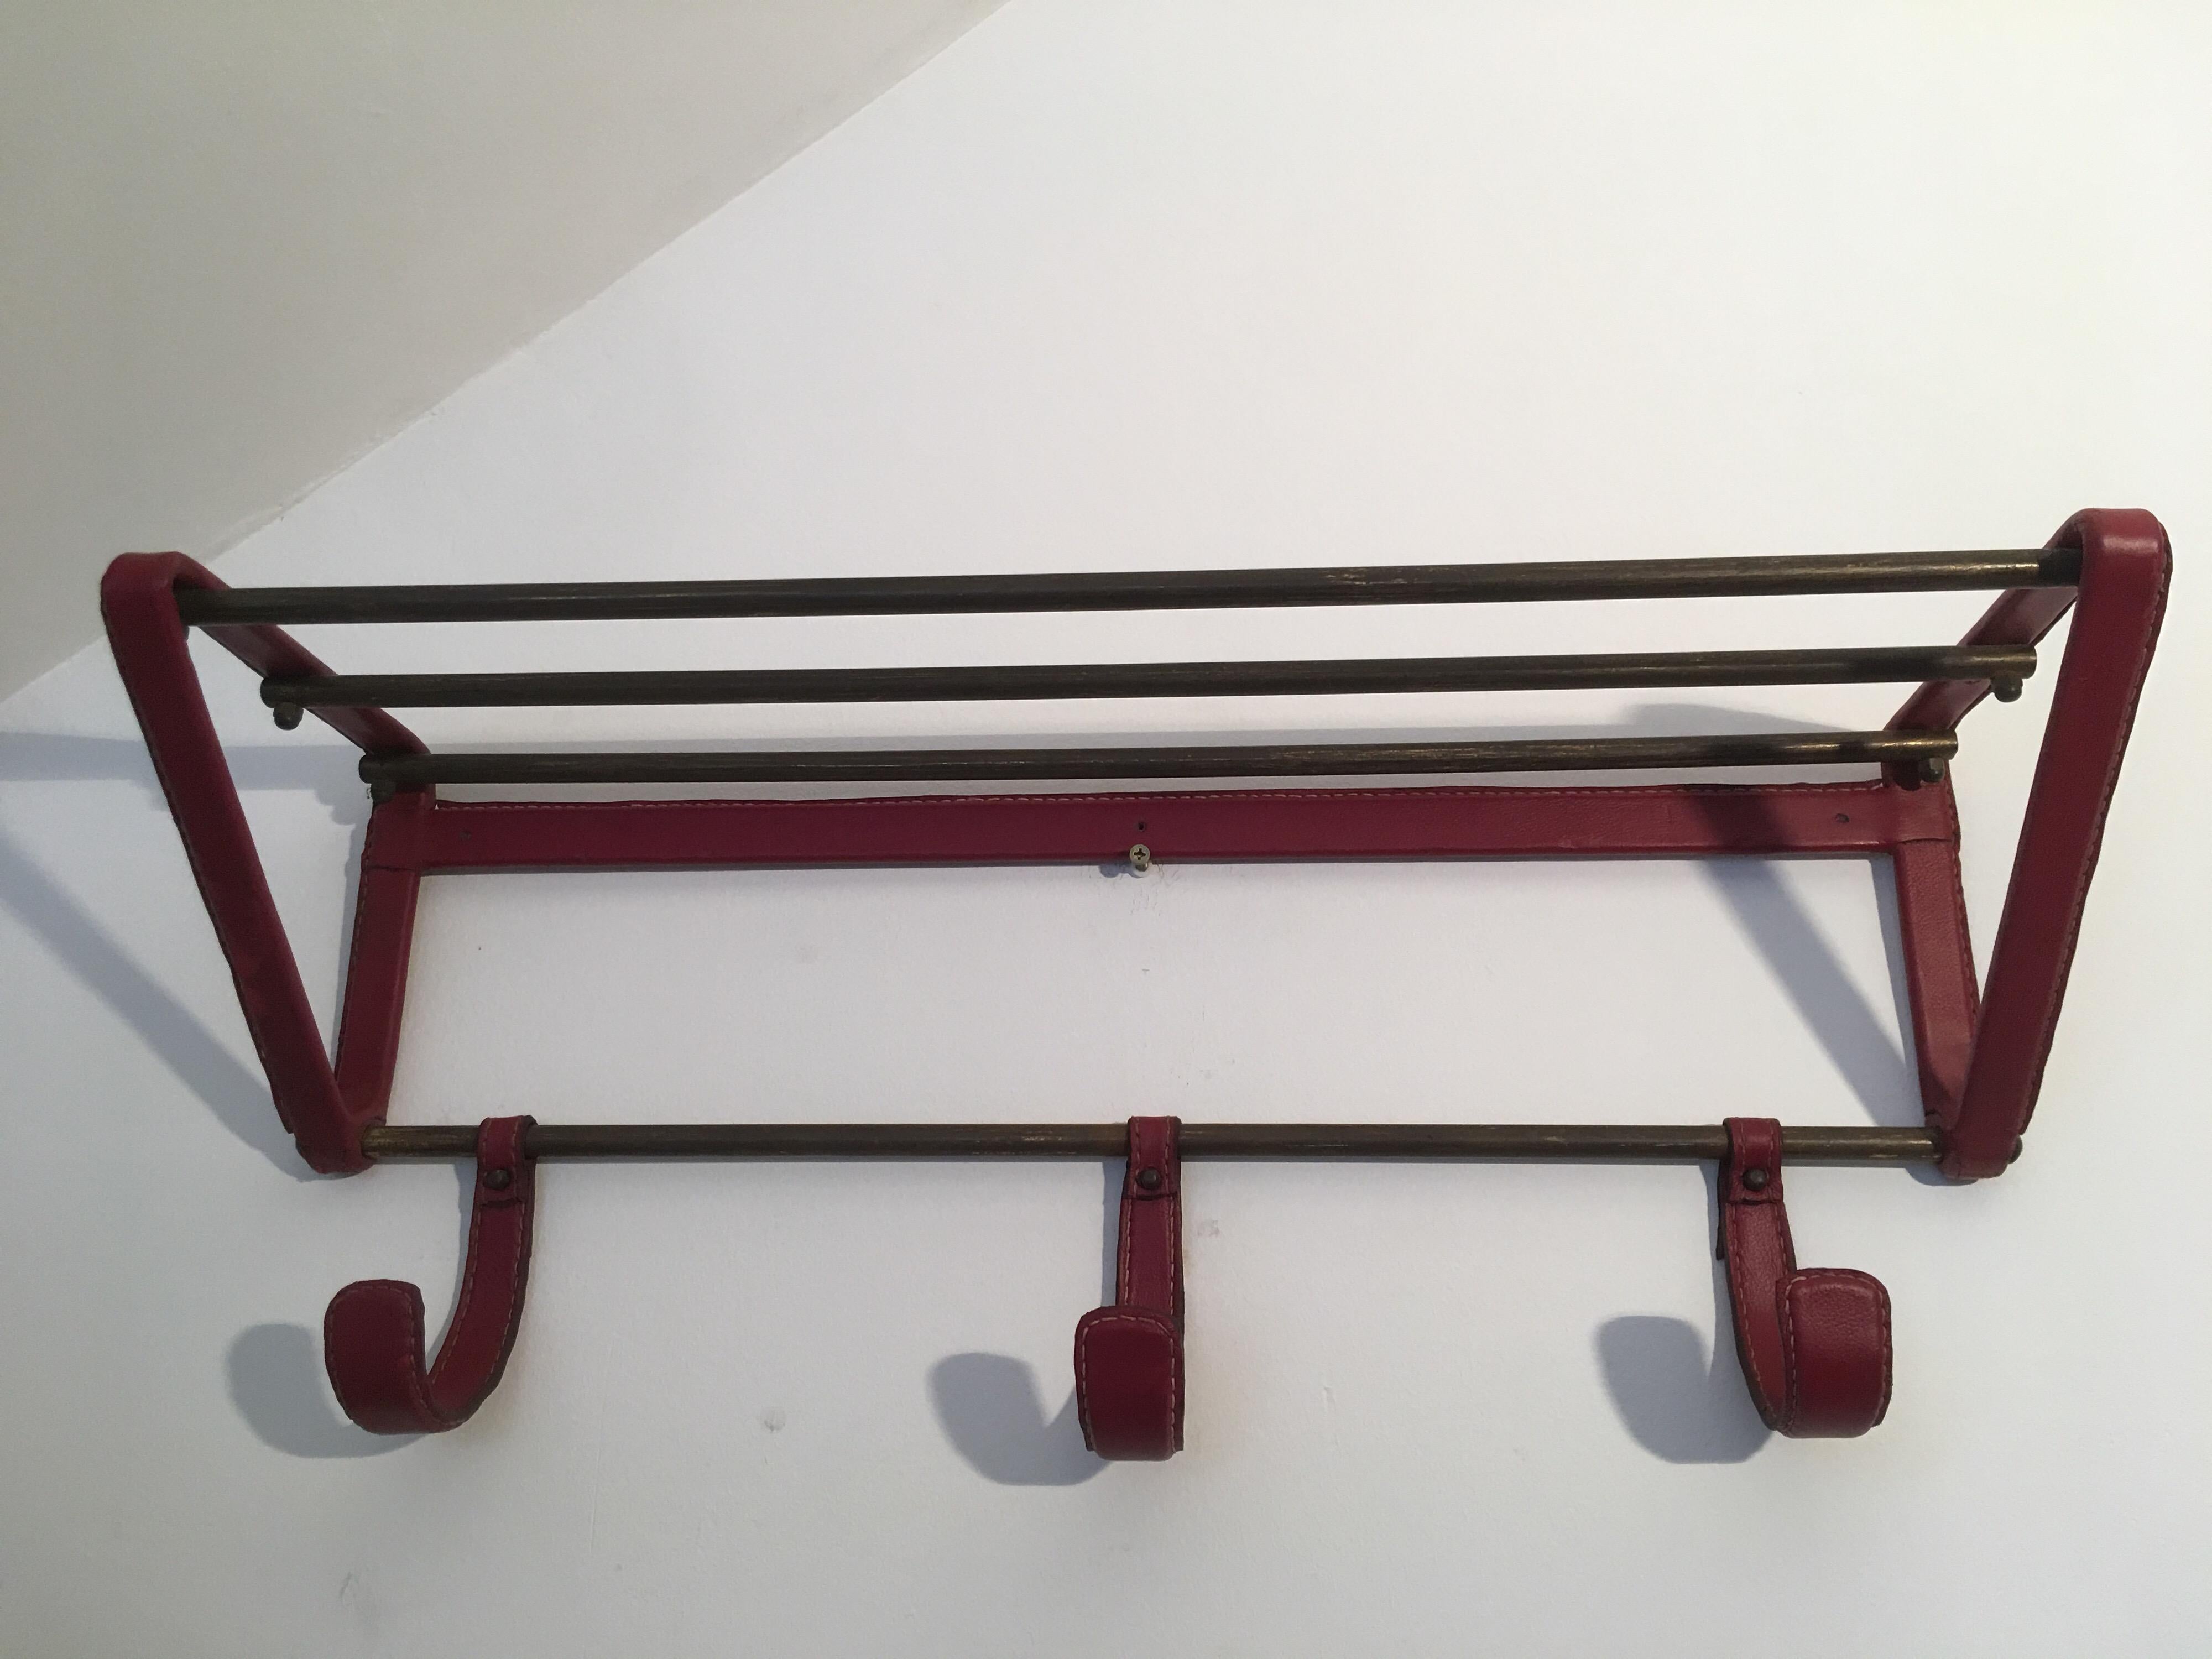 Red stitched leather coat rack and brass hat rack, designed by jacques Adnet in France in 1950s.
Rare and beautiful red color of the original leather.
Minor scratches on the original leather but nothing unsightly.
Vintage patina on all brass